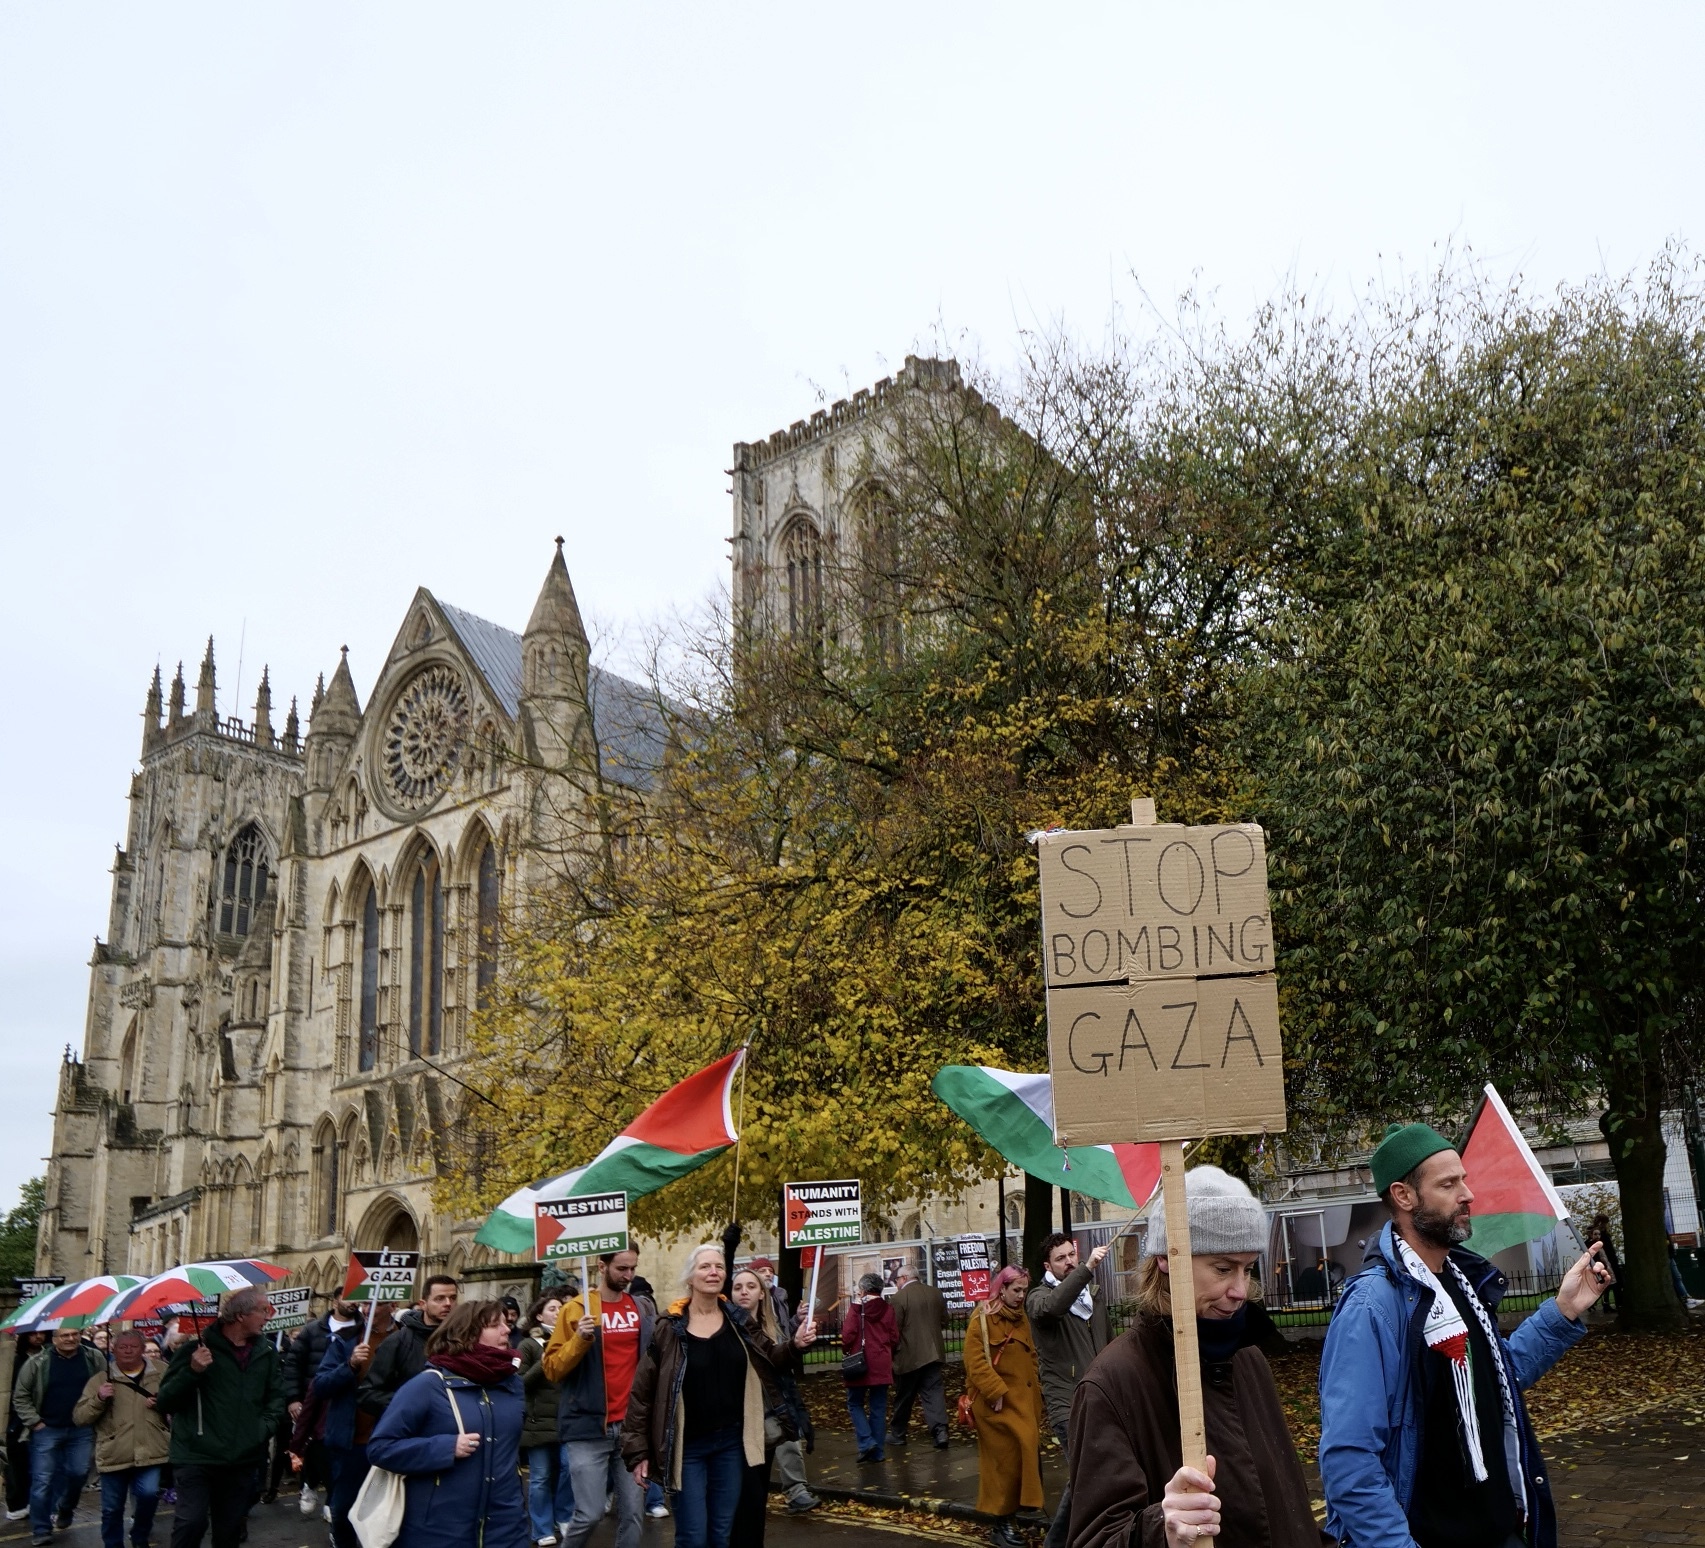 Protesters march past the iconic York Minster